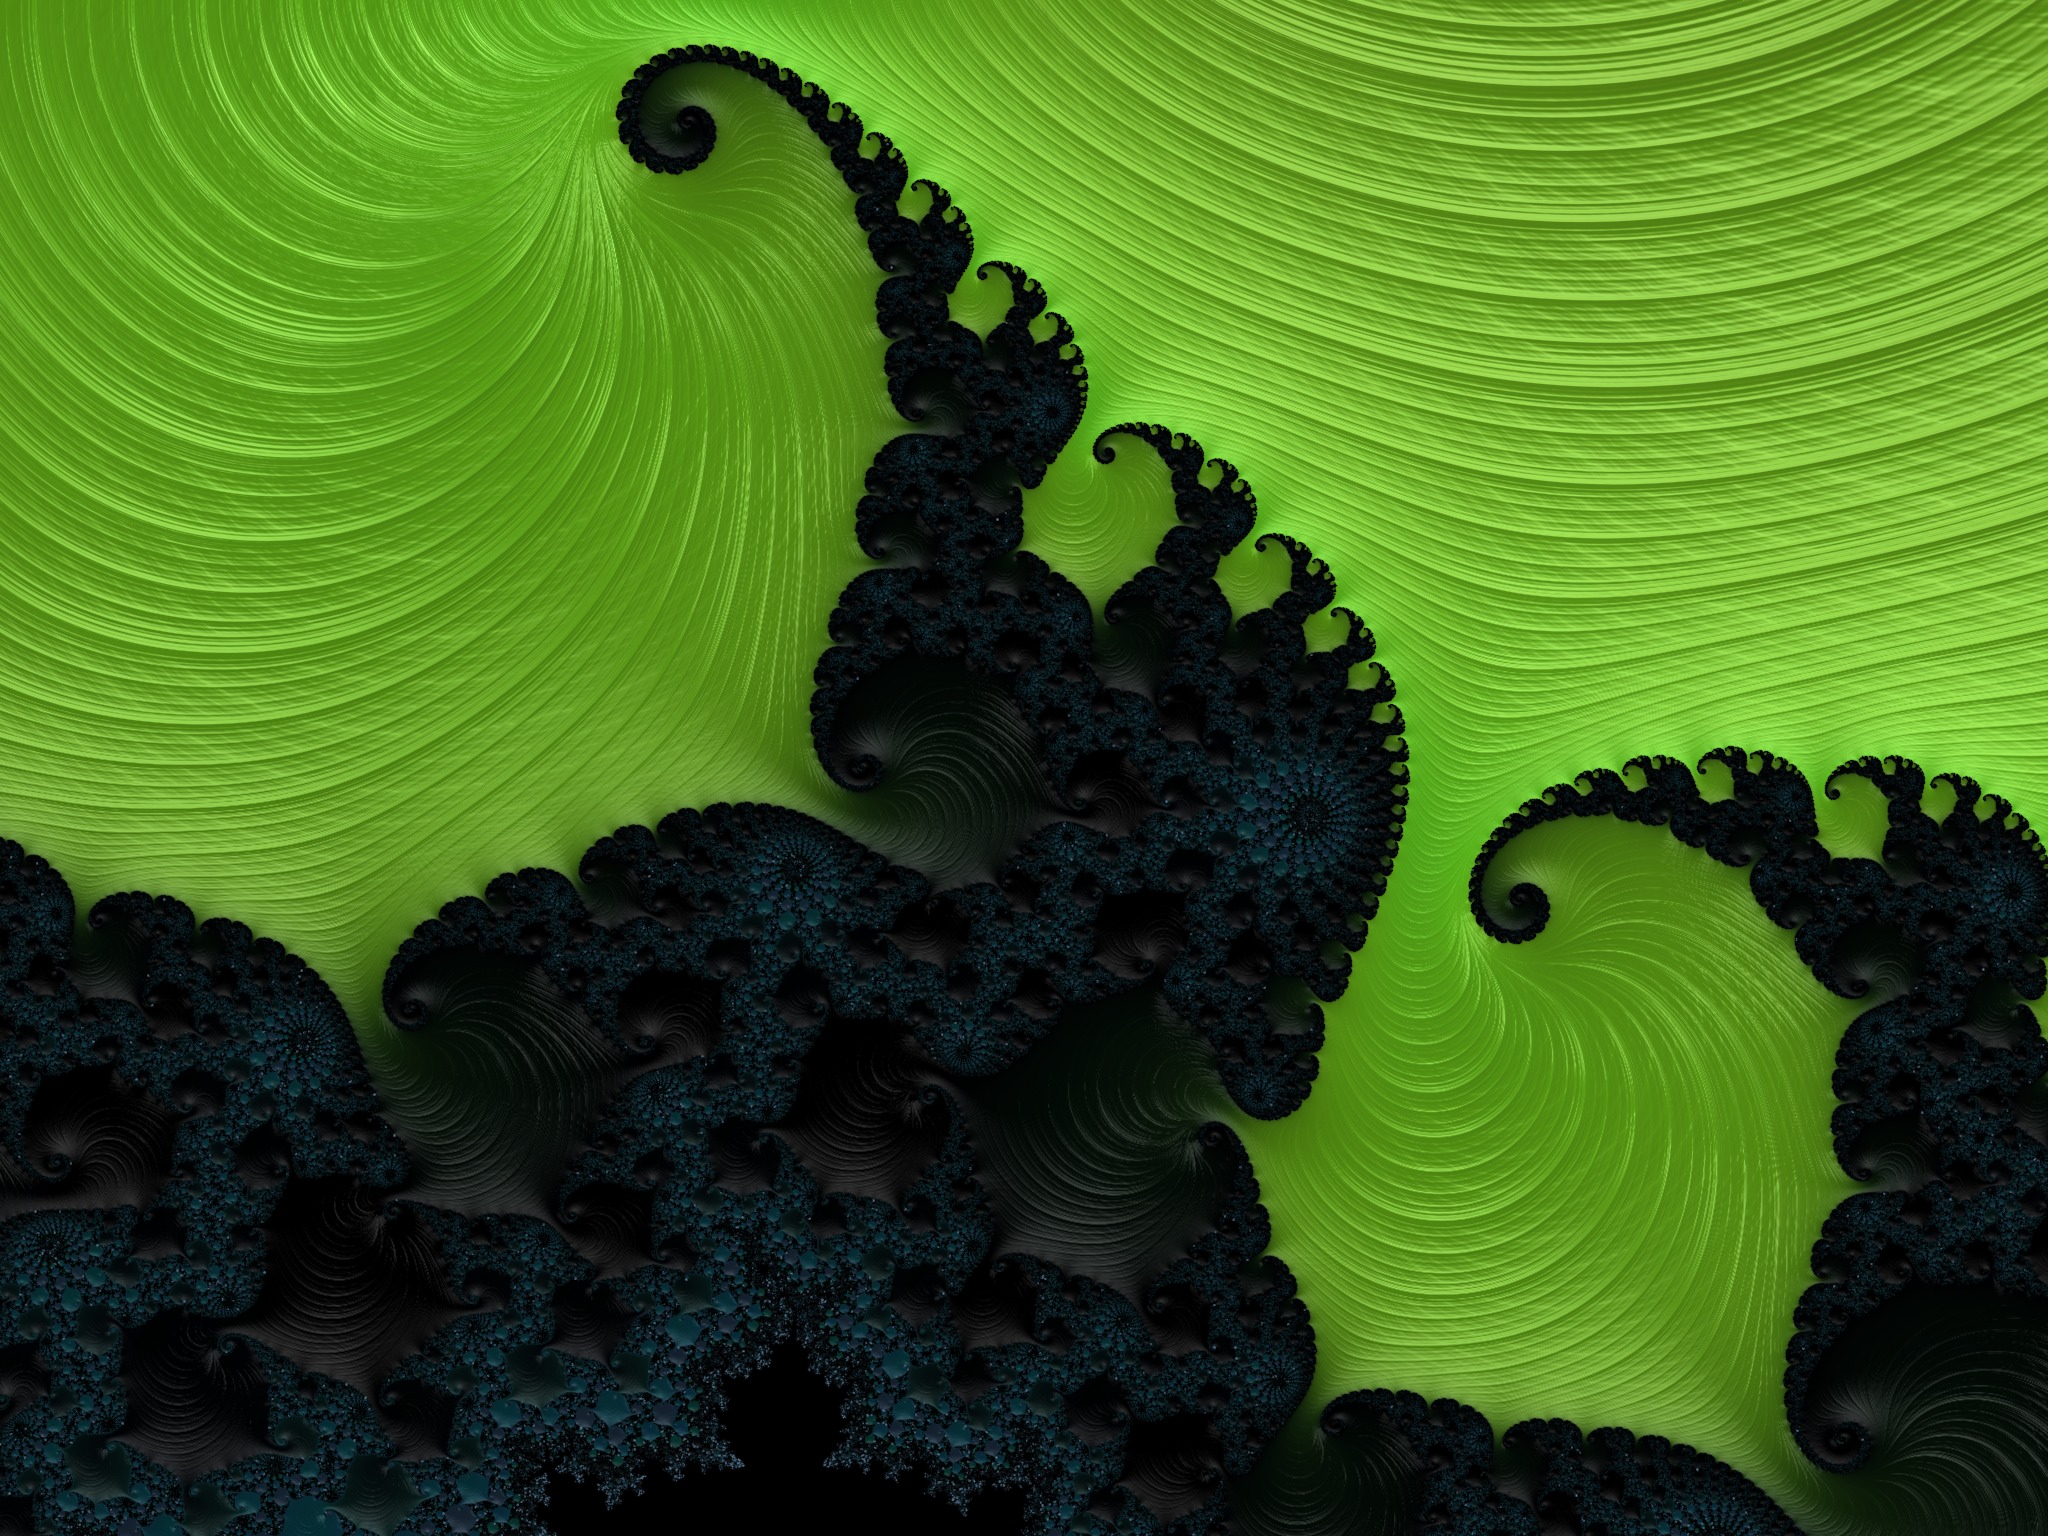 The Green Fractal - 2048px x 1536px